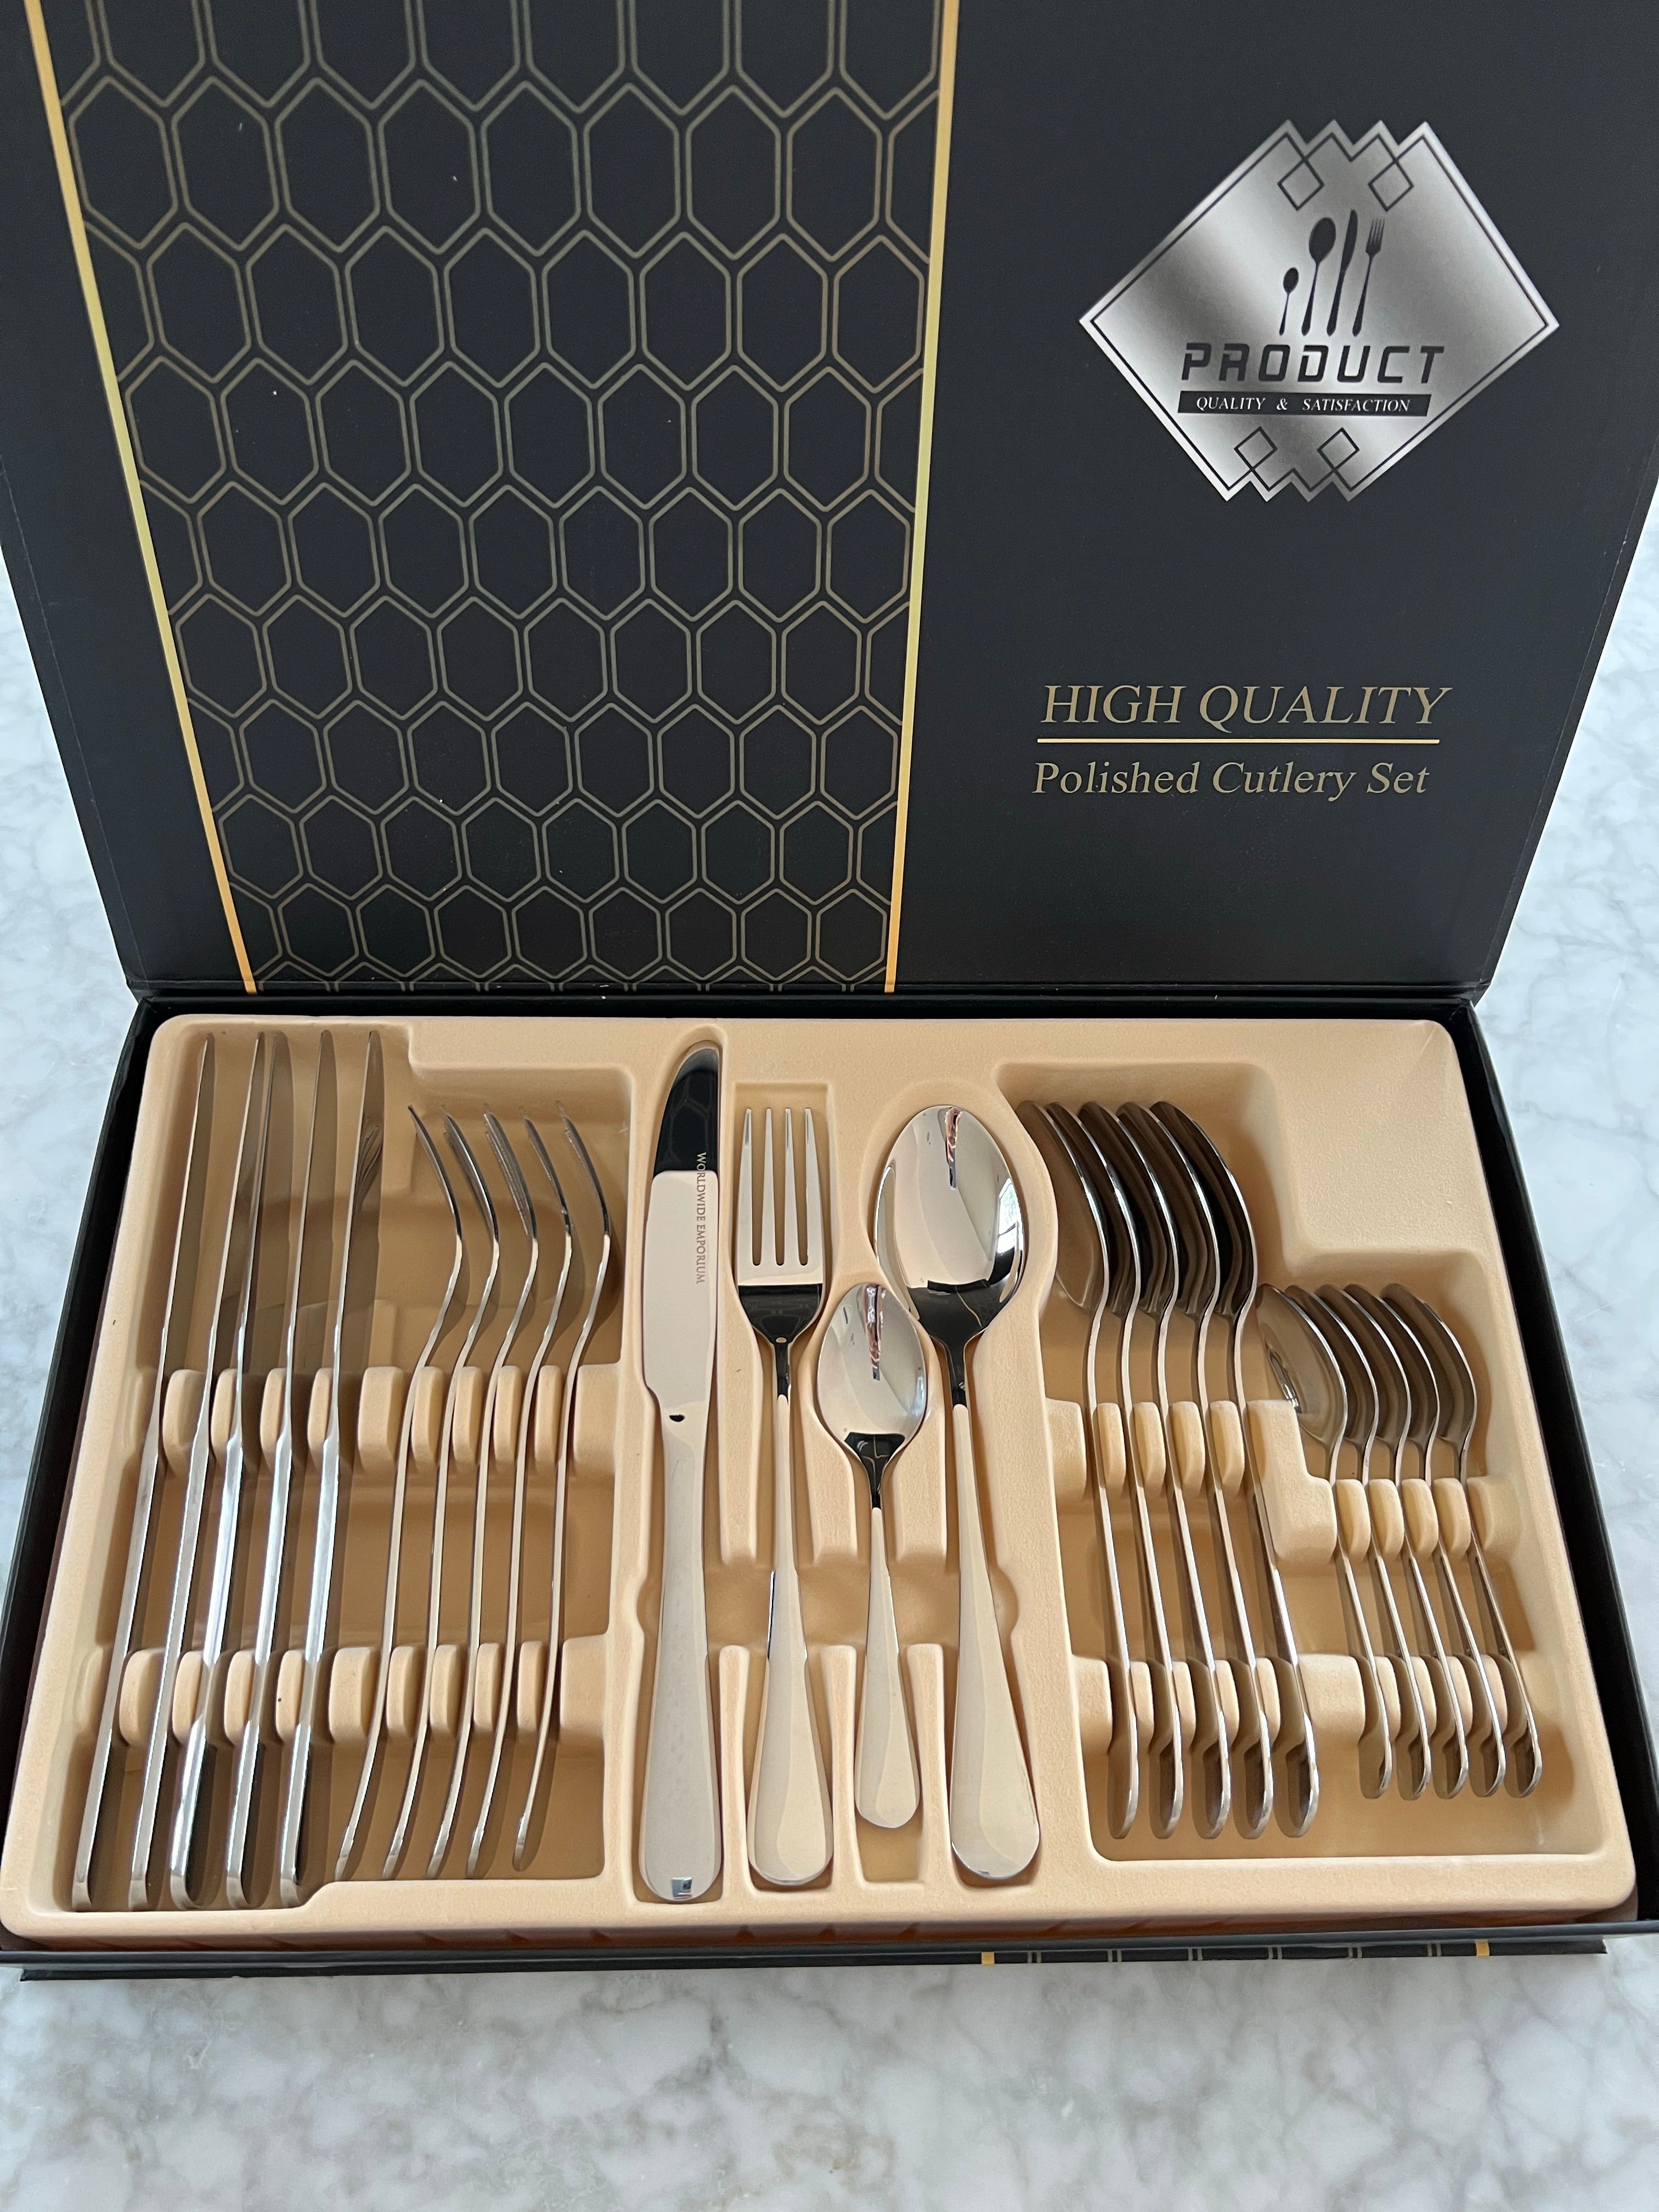 24 pcs Silver Premium Stainless Steel Cutlery Set